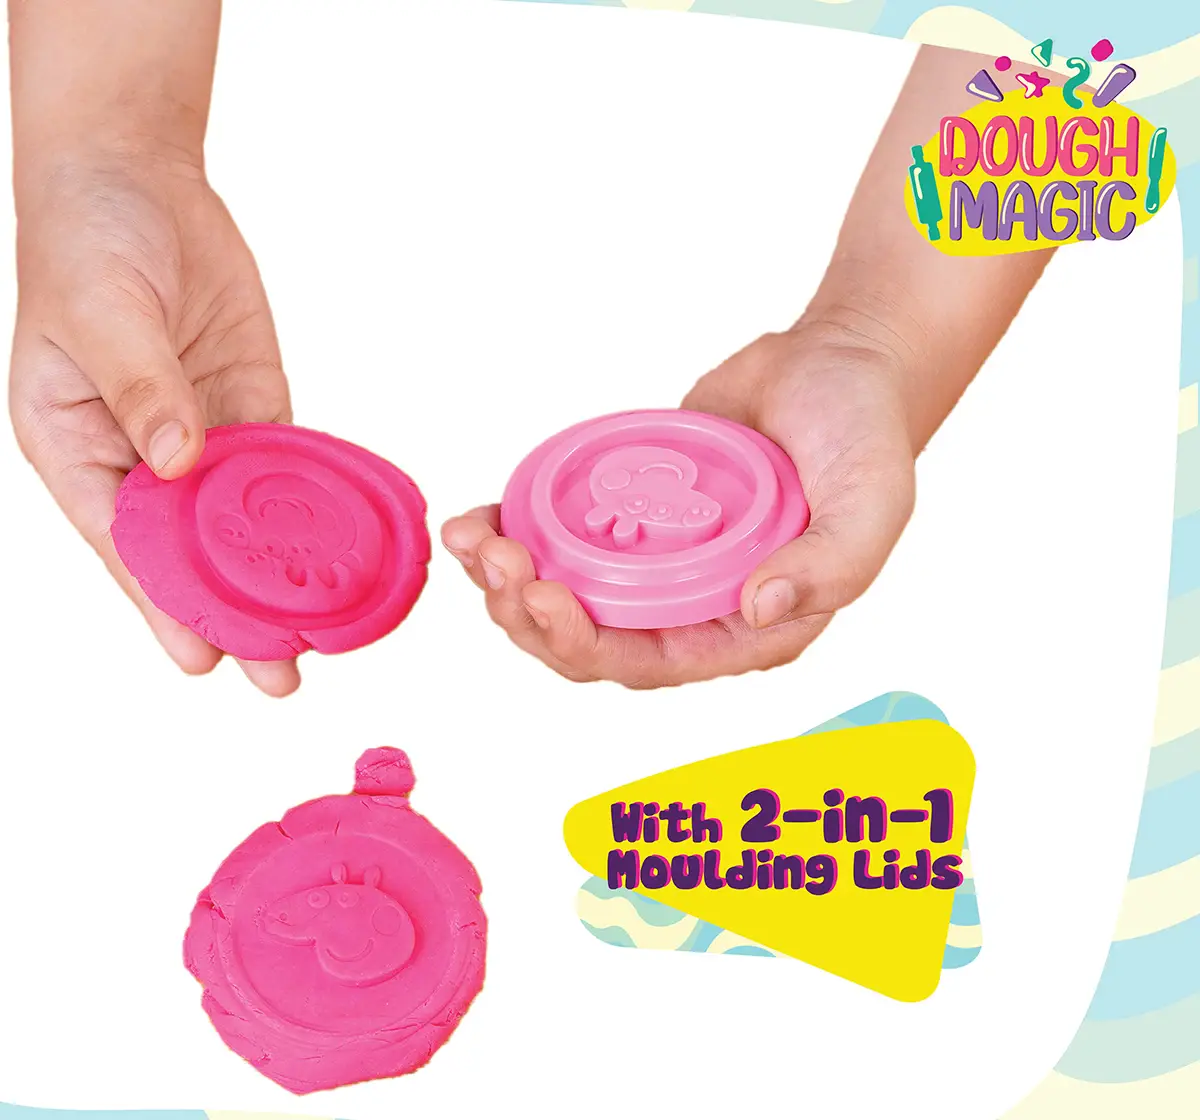 Dough Magic Peppa Pig Dough Tubs With 2 in 1 Moulding Lid Pack of 6 For Kids of Age 3Y+, Multicolour